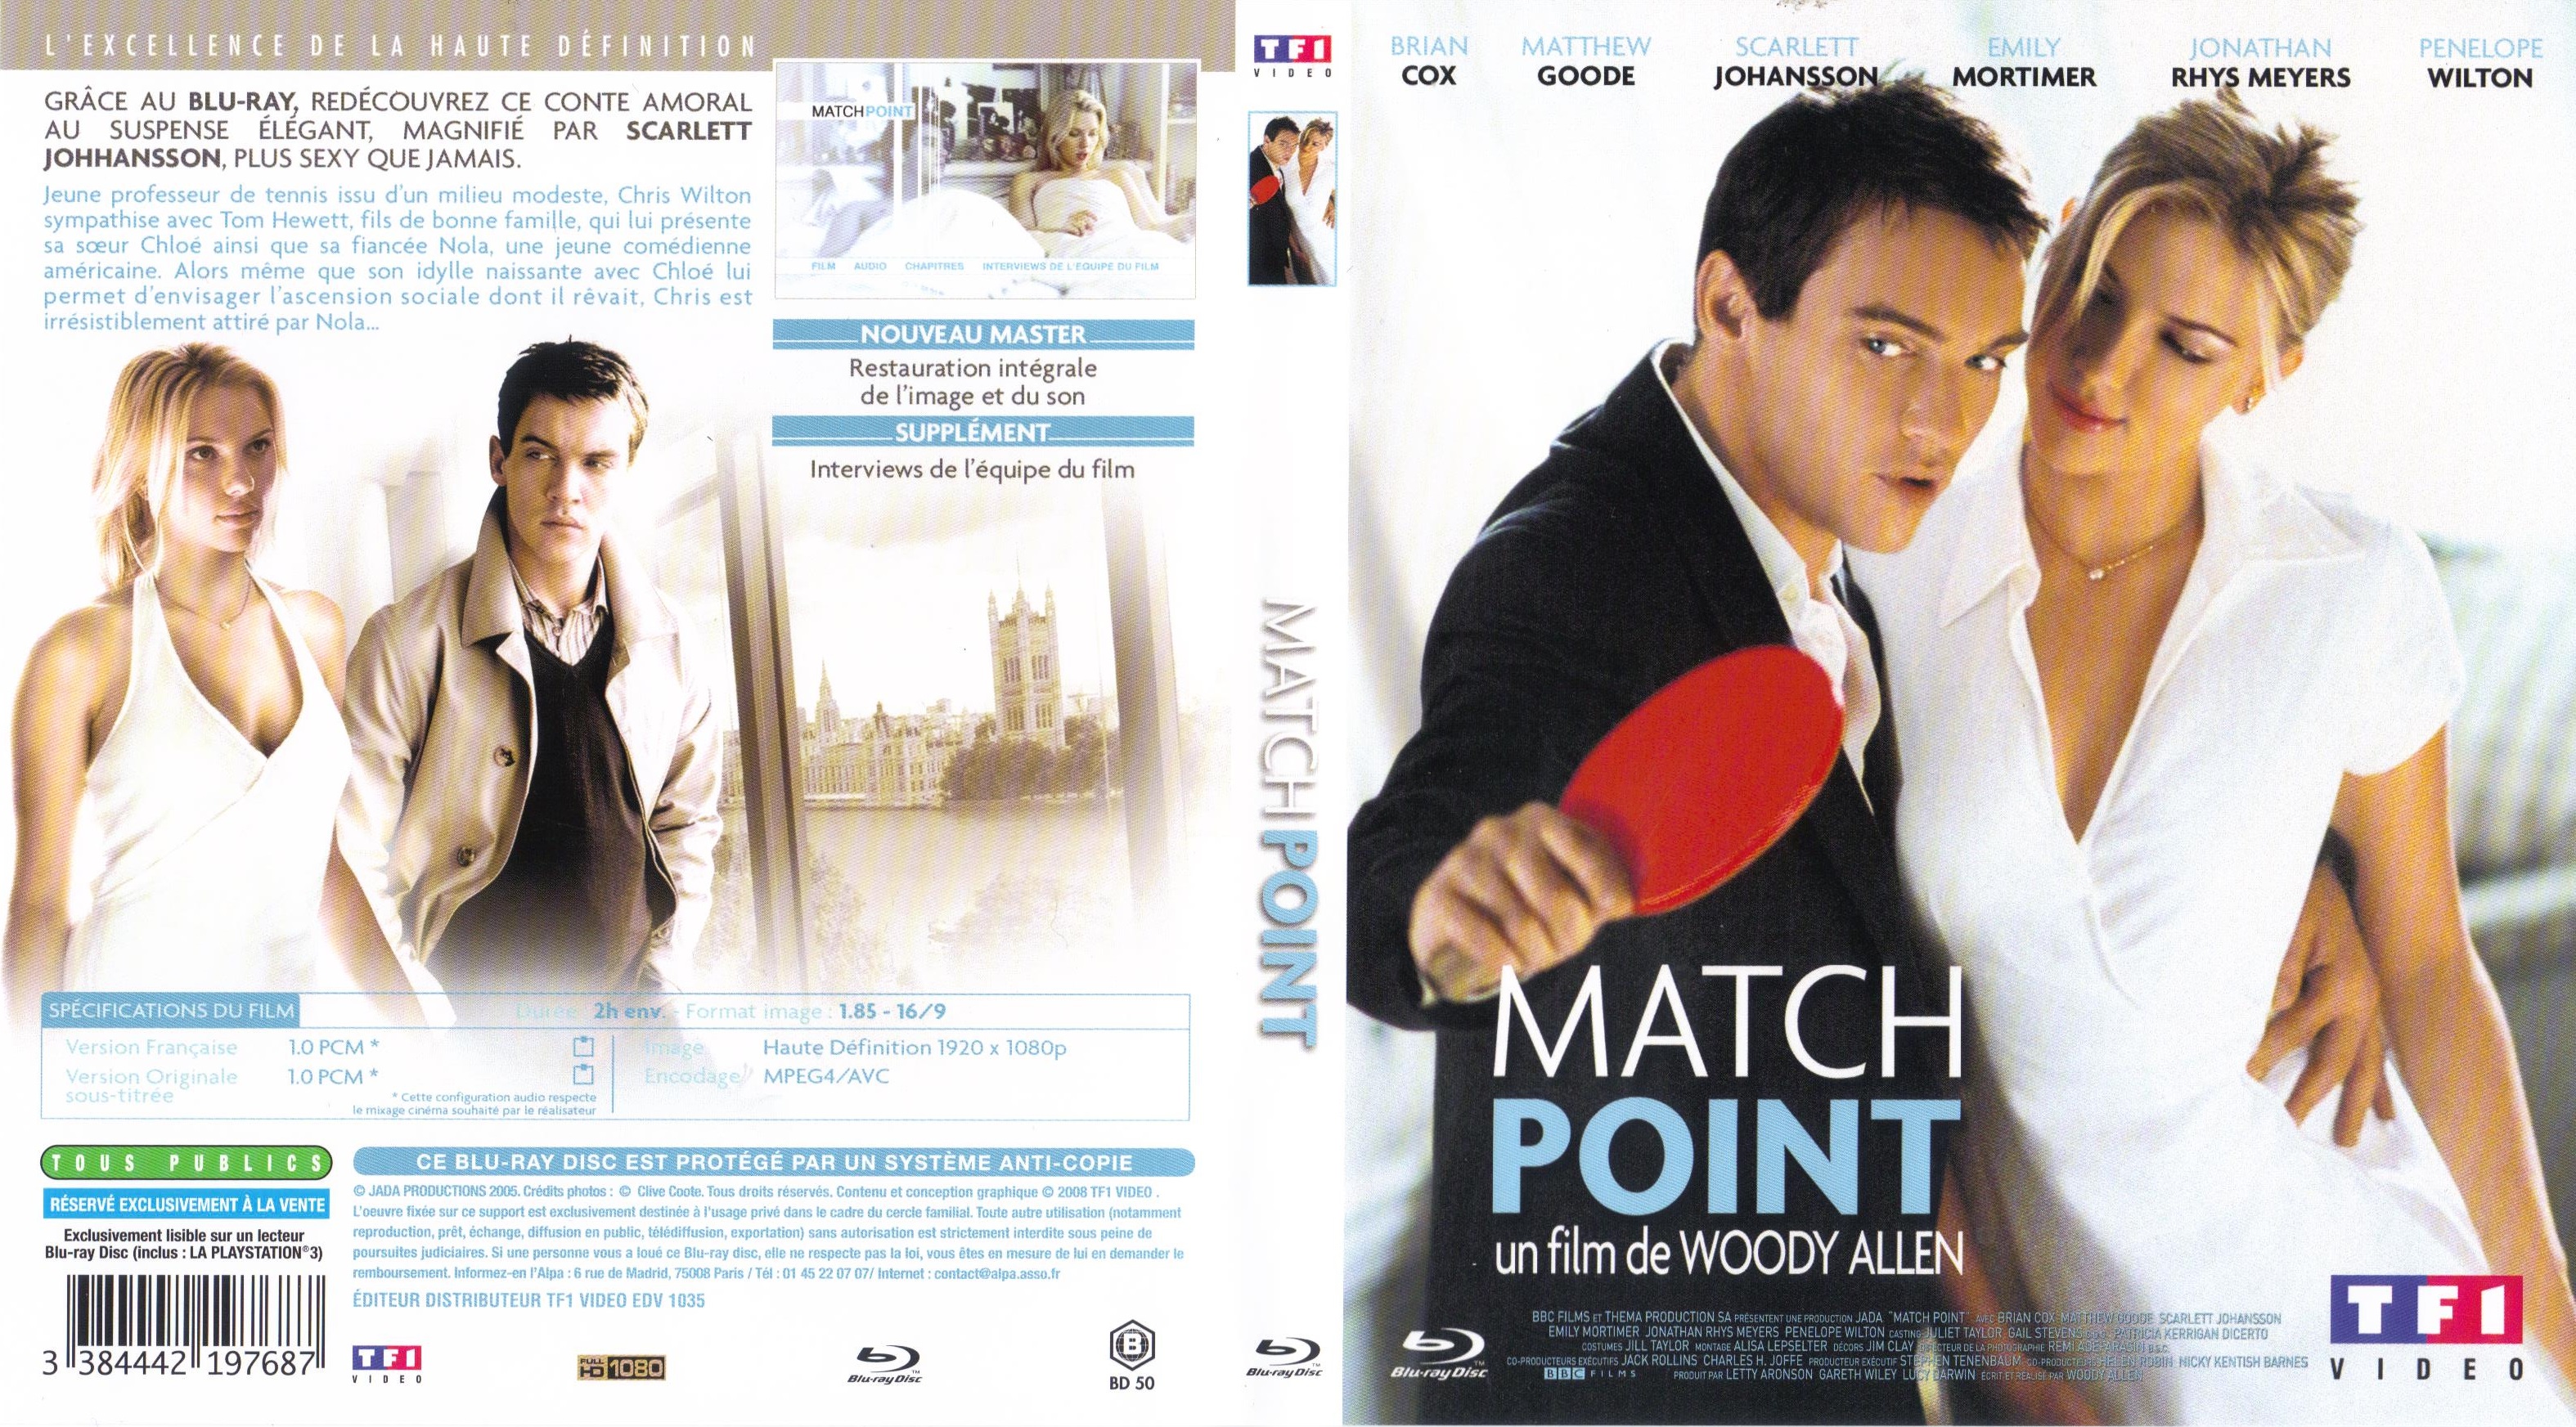 Jaquette DVD Match Point (BLU-RAY)